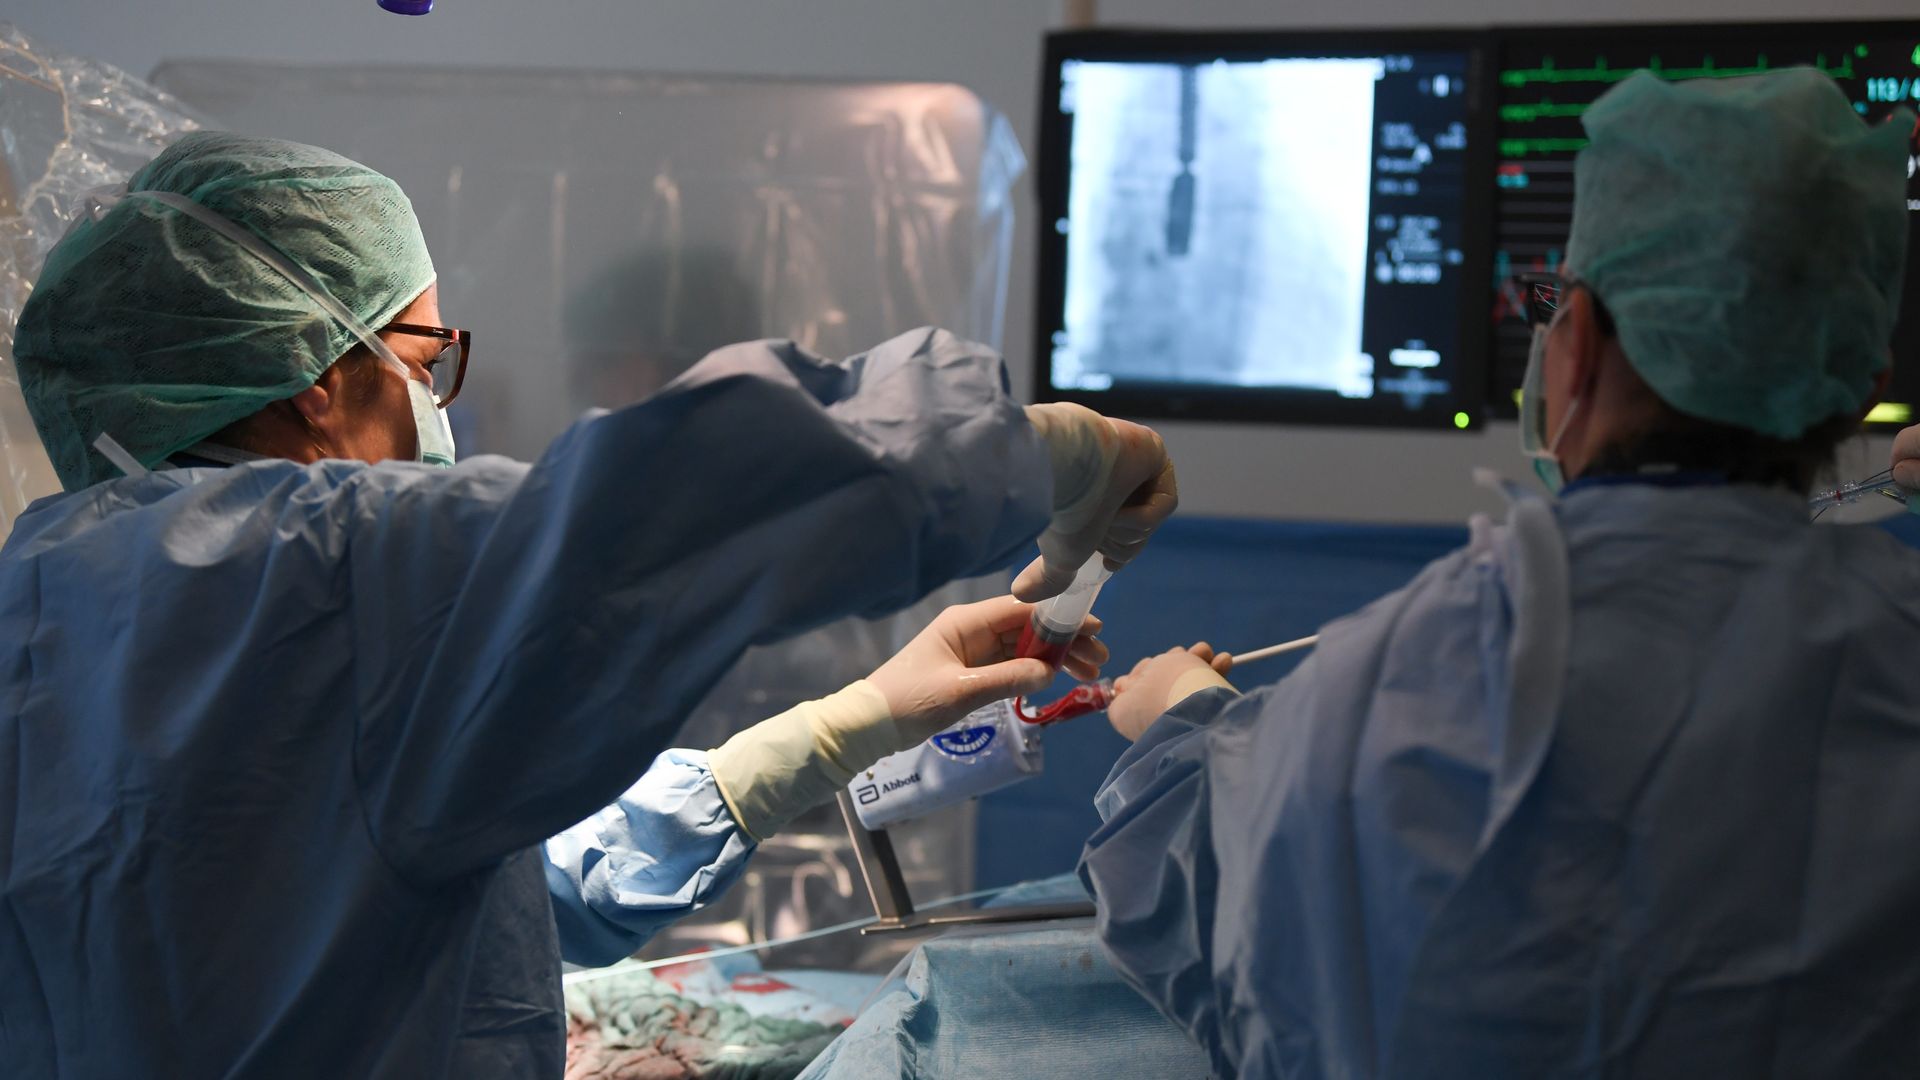 Surgeons prepare an operating room for a patient.